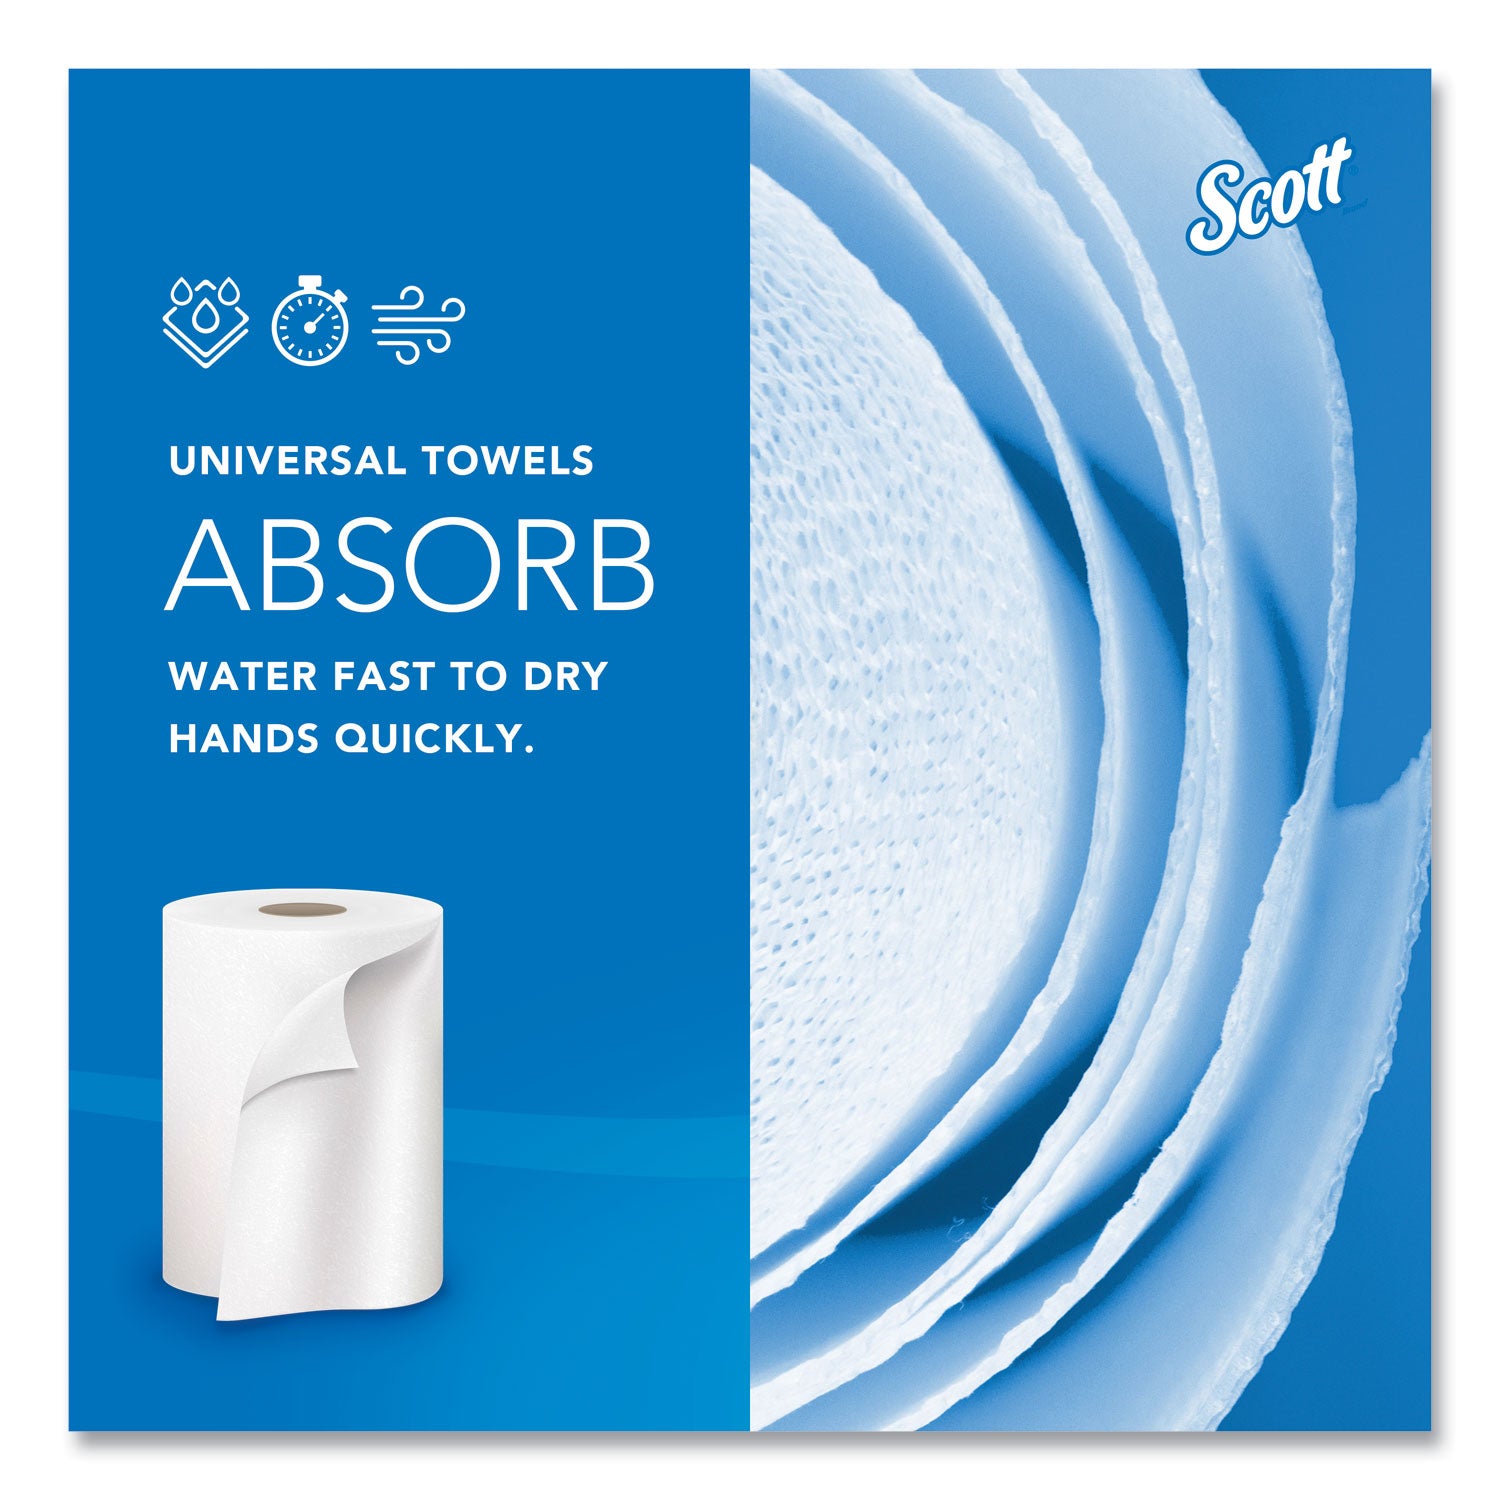 Essential Hard Roll Towels for Business, Absorbency Pockets, 1-Ply, 8" x 800 ft, 1.5" Core, White, 12 Rolls/Carton - 